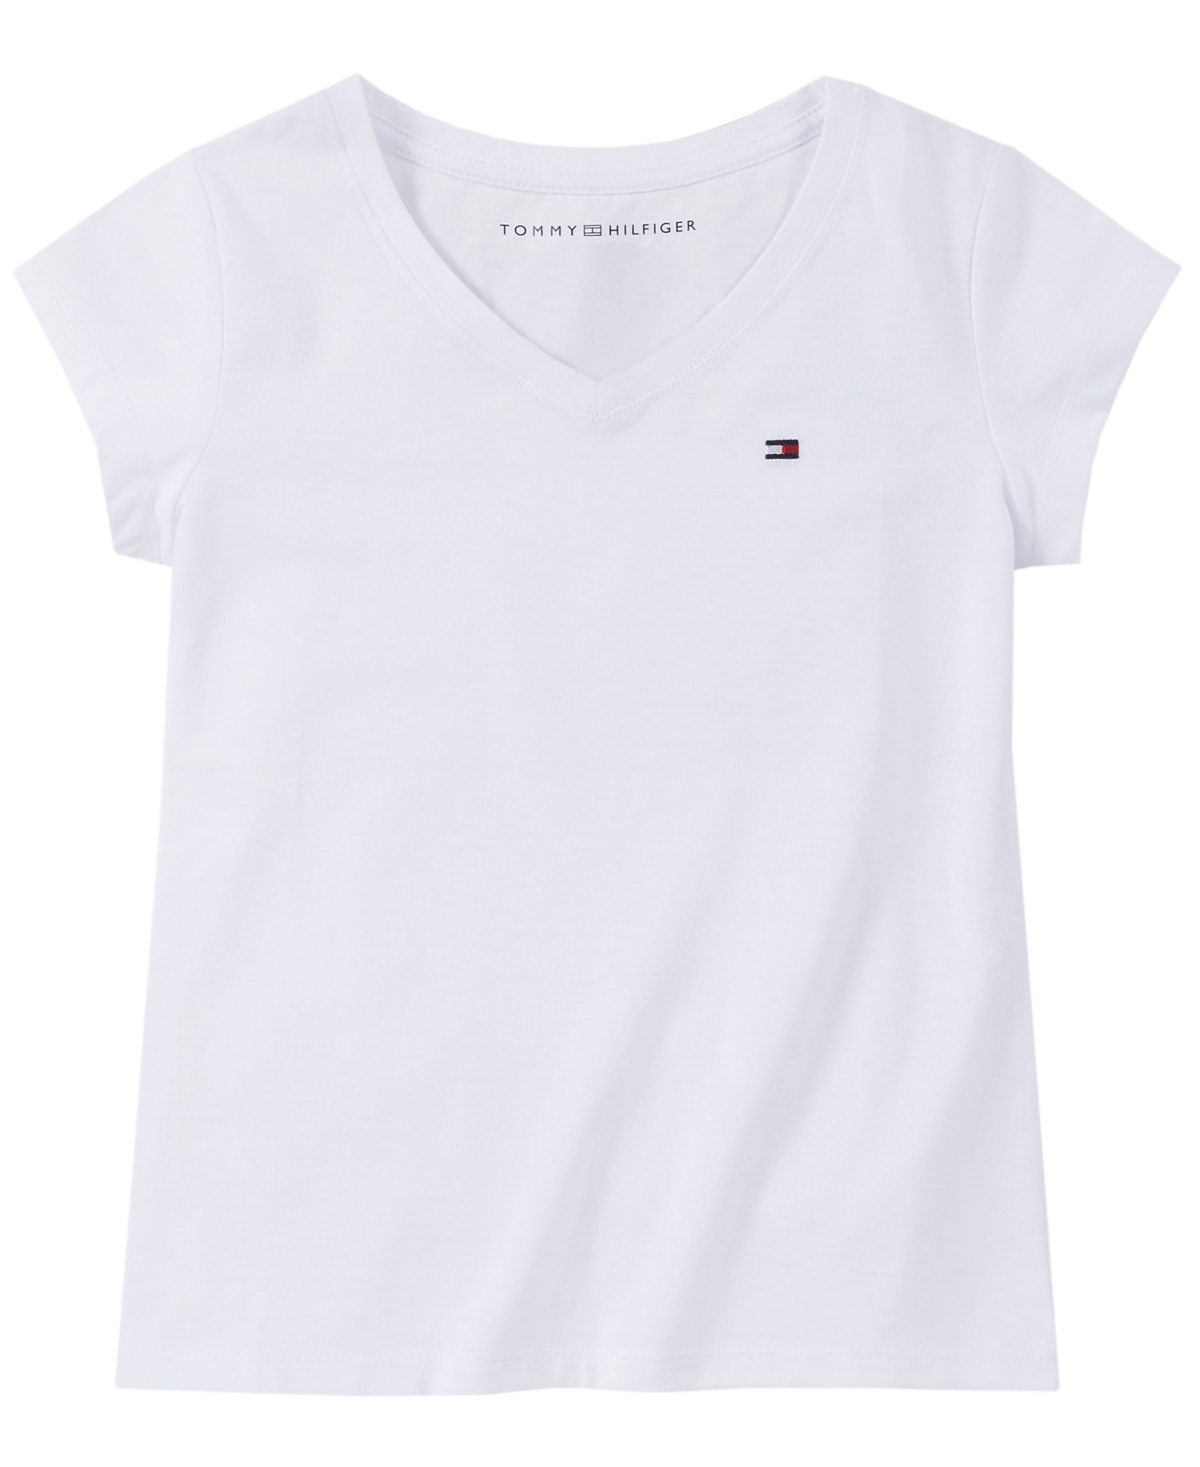 Tommy Hilfiger Toddler Girls Signature T-shirt In White